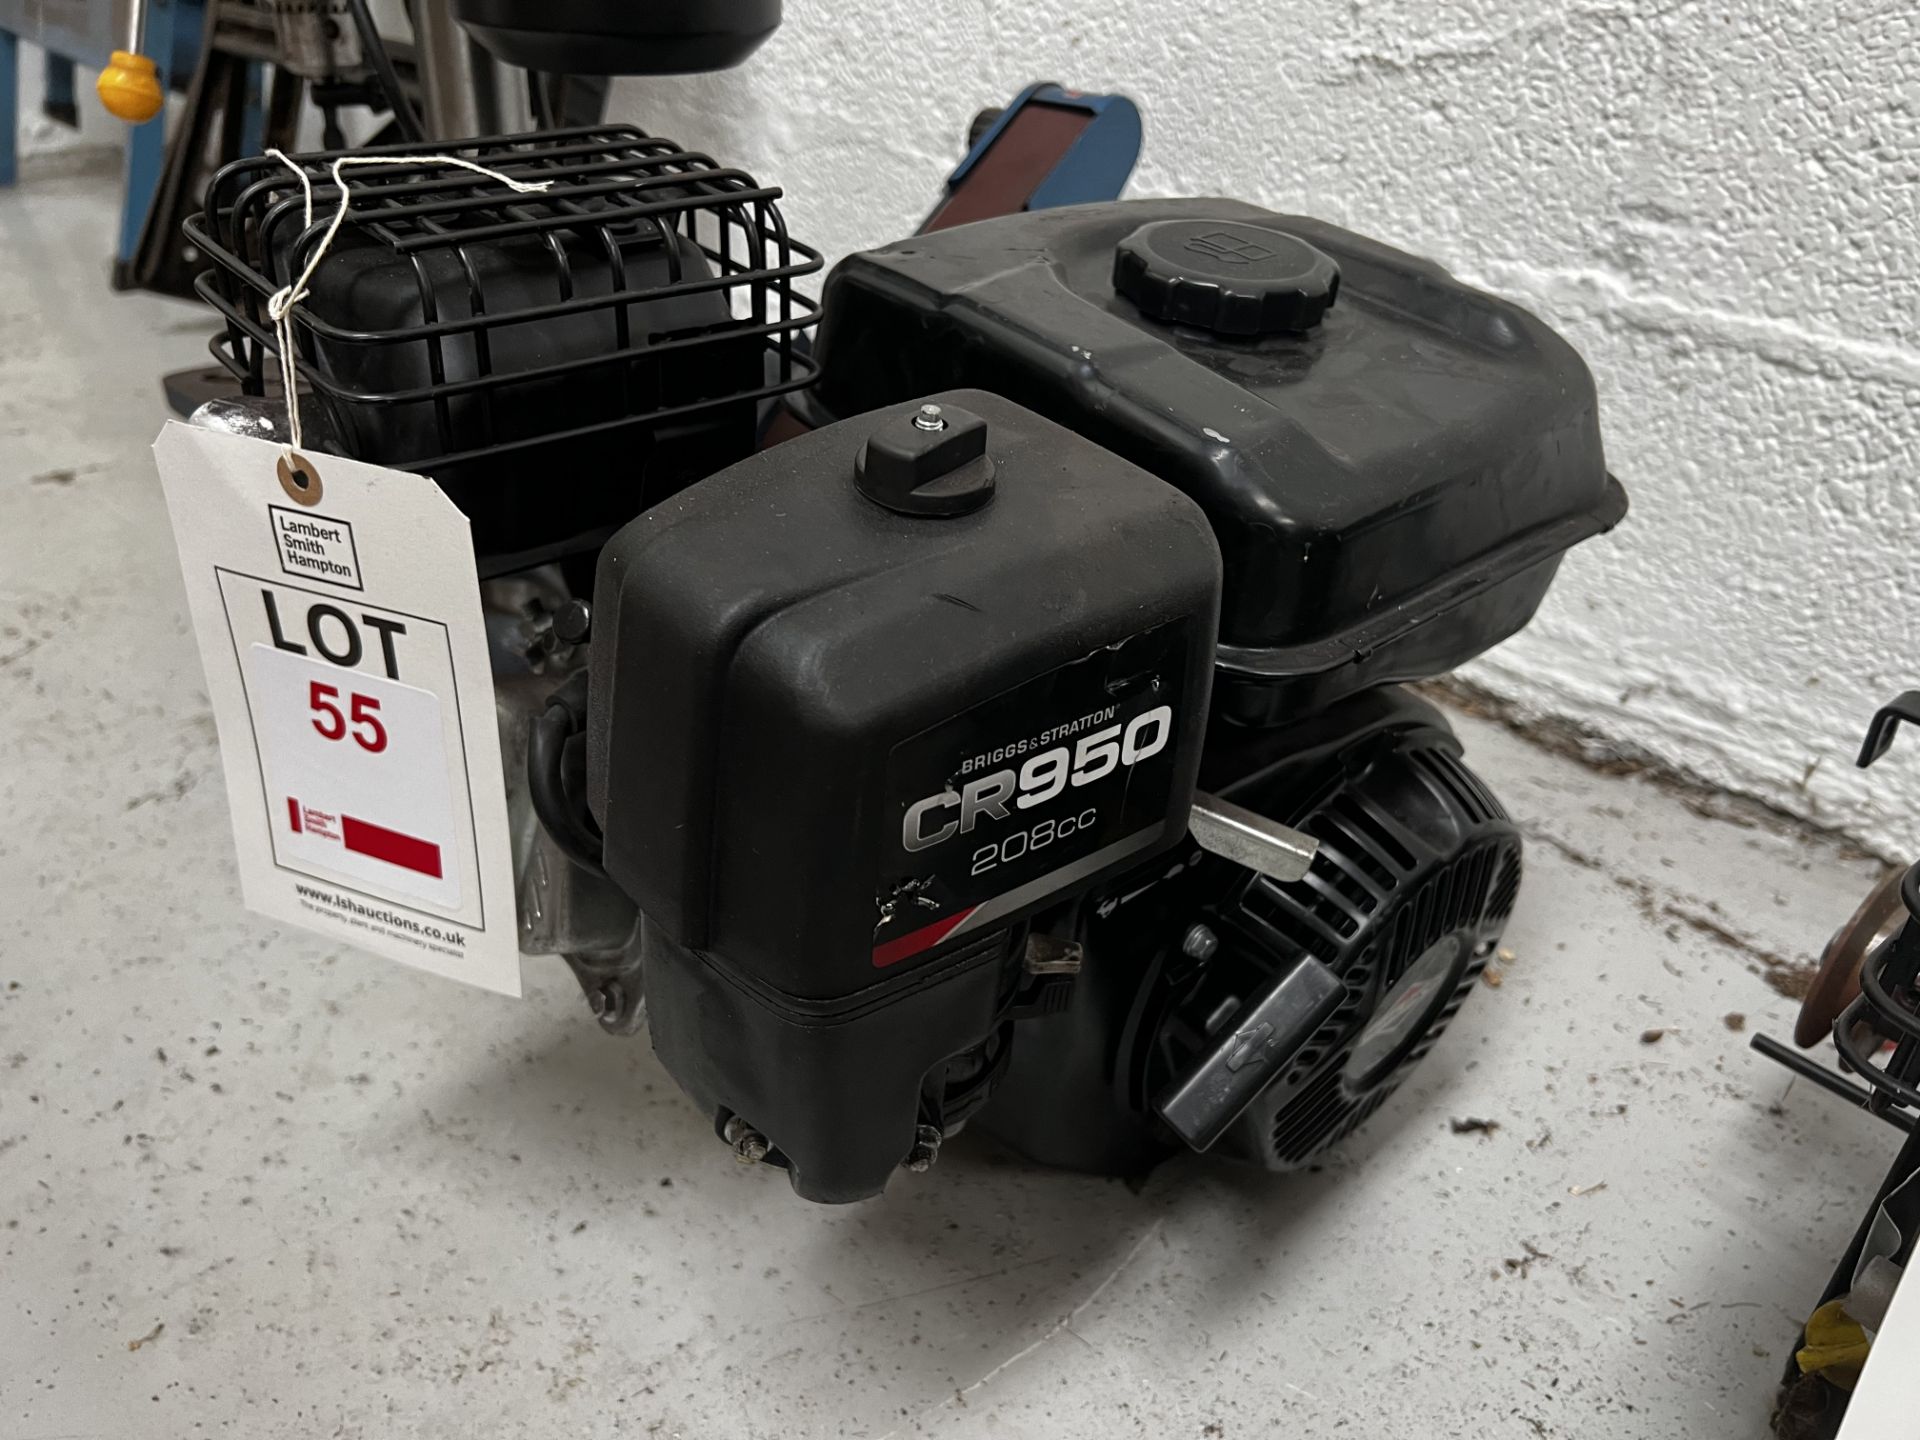 Briggs & Stratton CR950 208cc engine (This lot is located in Plympton) - Image 2 of 4